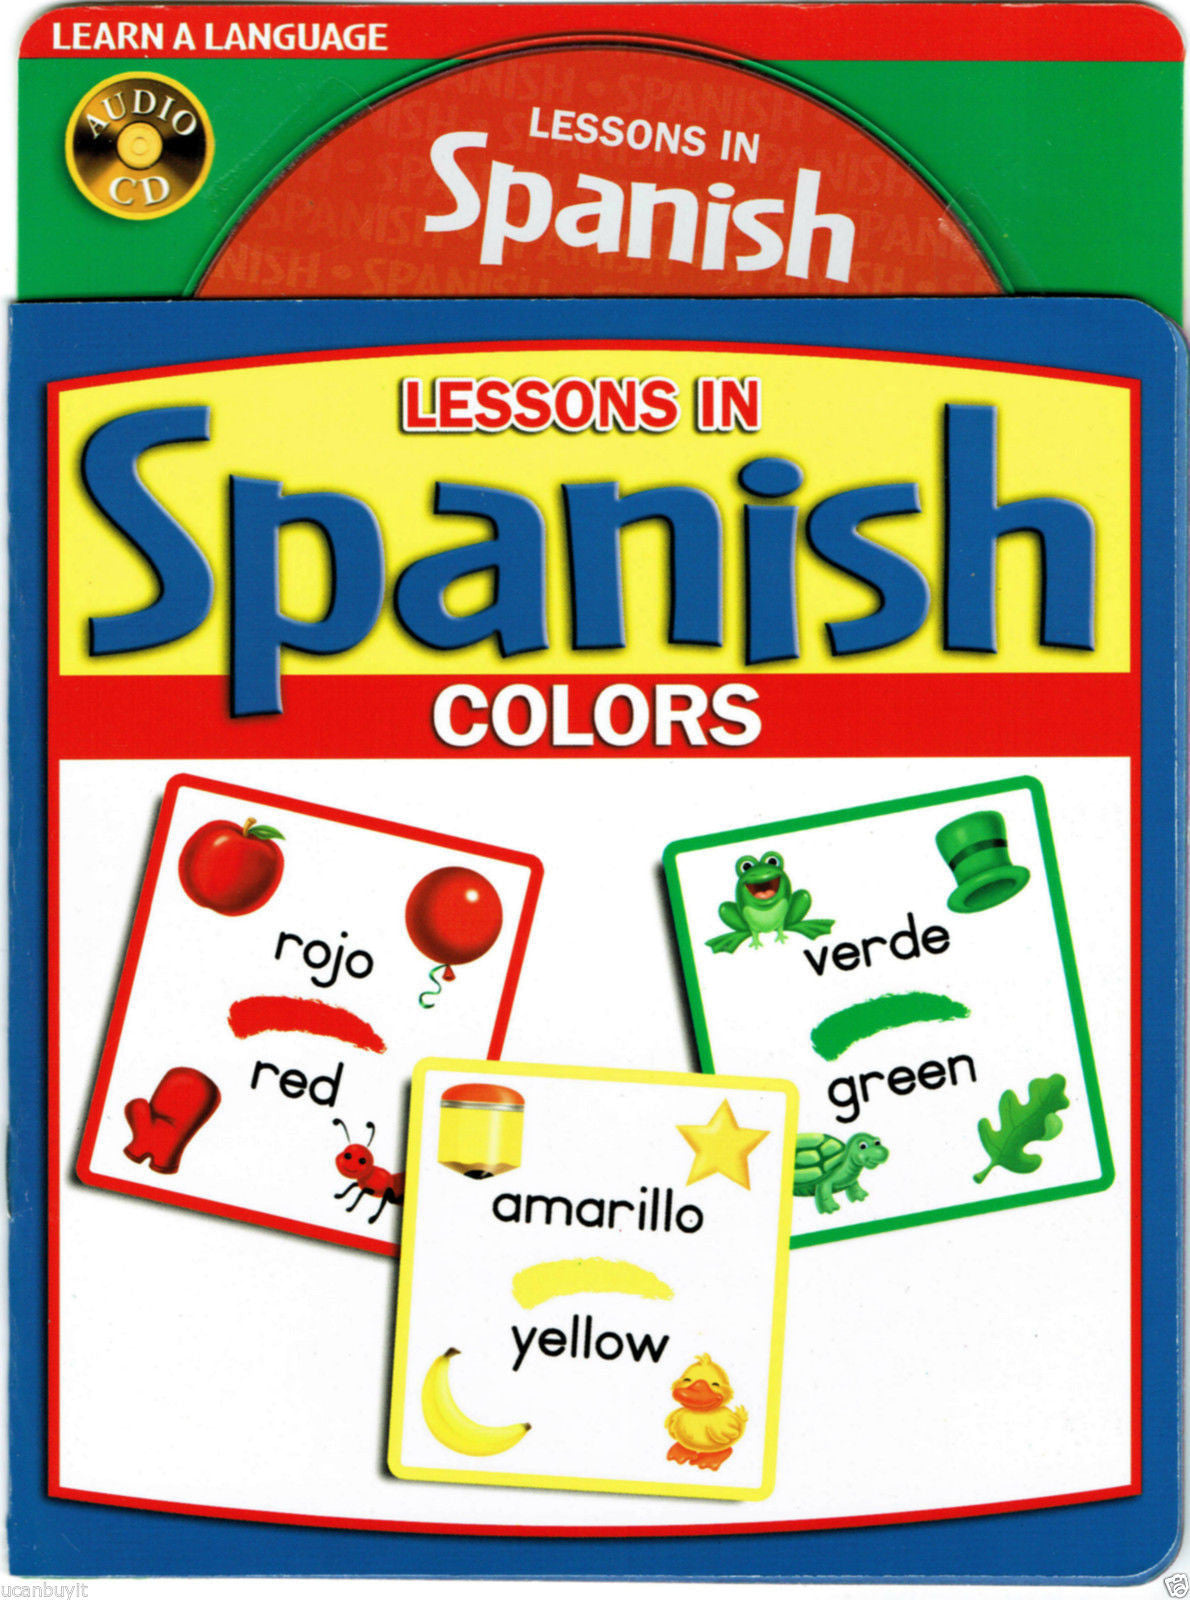 LESSONS IN SPANISH Educational Picture Book and Audio CD of COLORS Ages 5+ - Teacher In Spanish